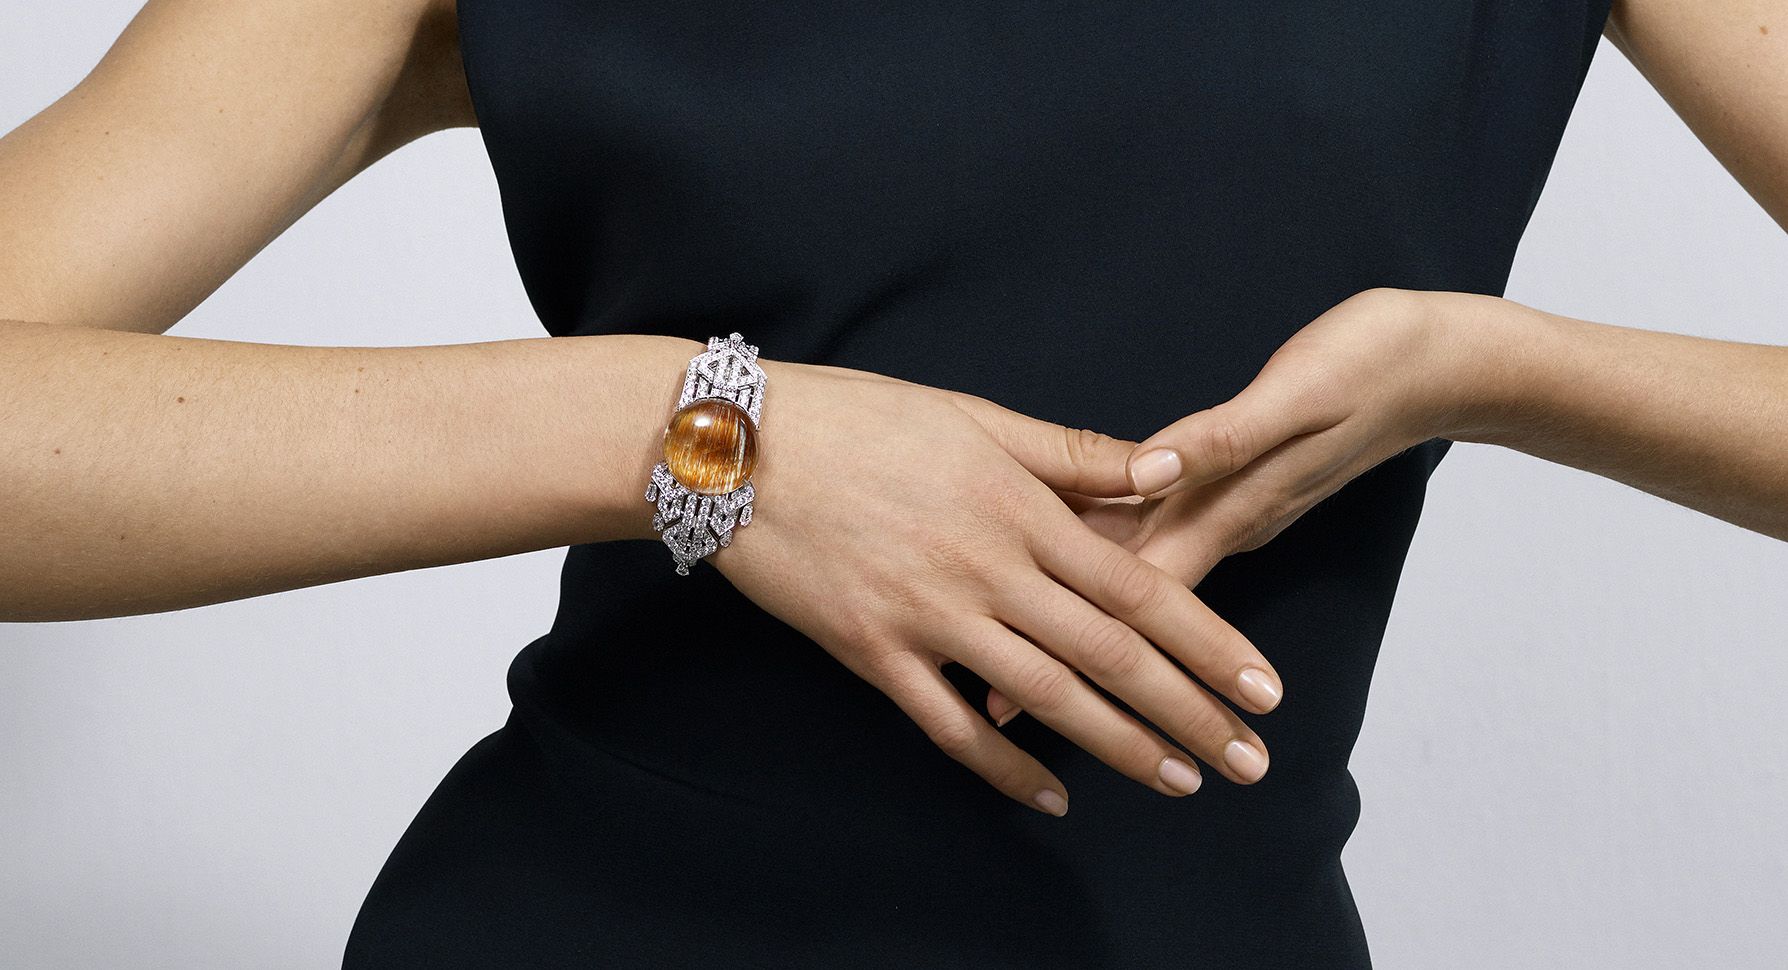 Cartier Ruby Bracelet presented during Couture Week in Paris